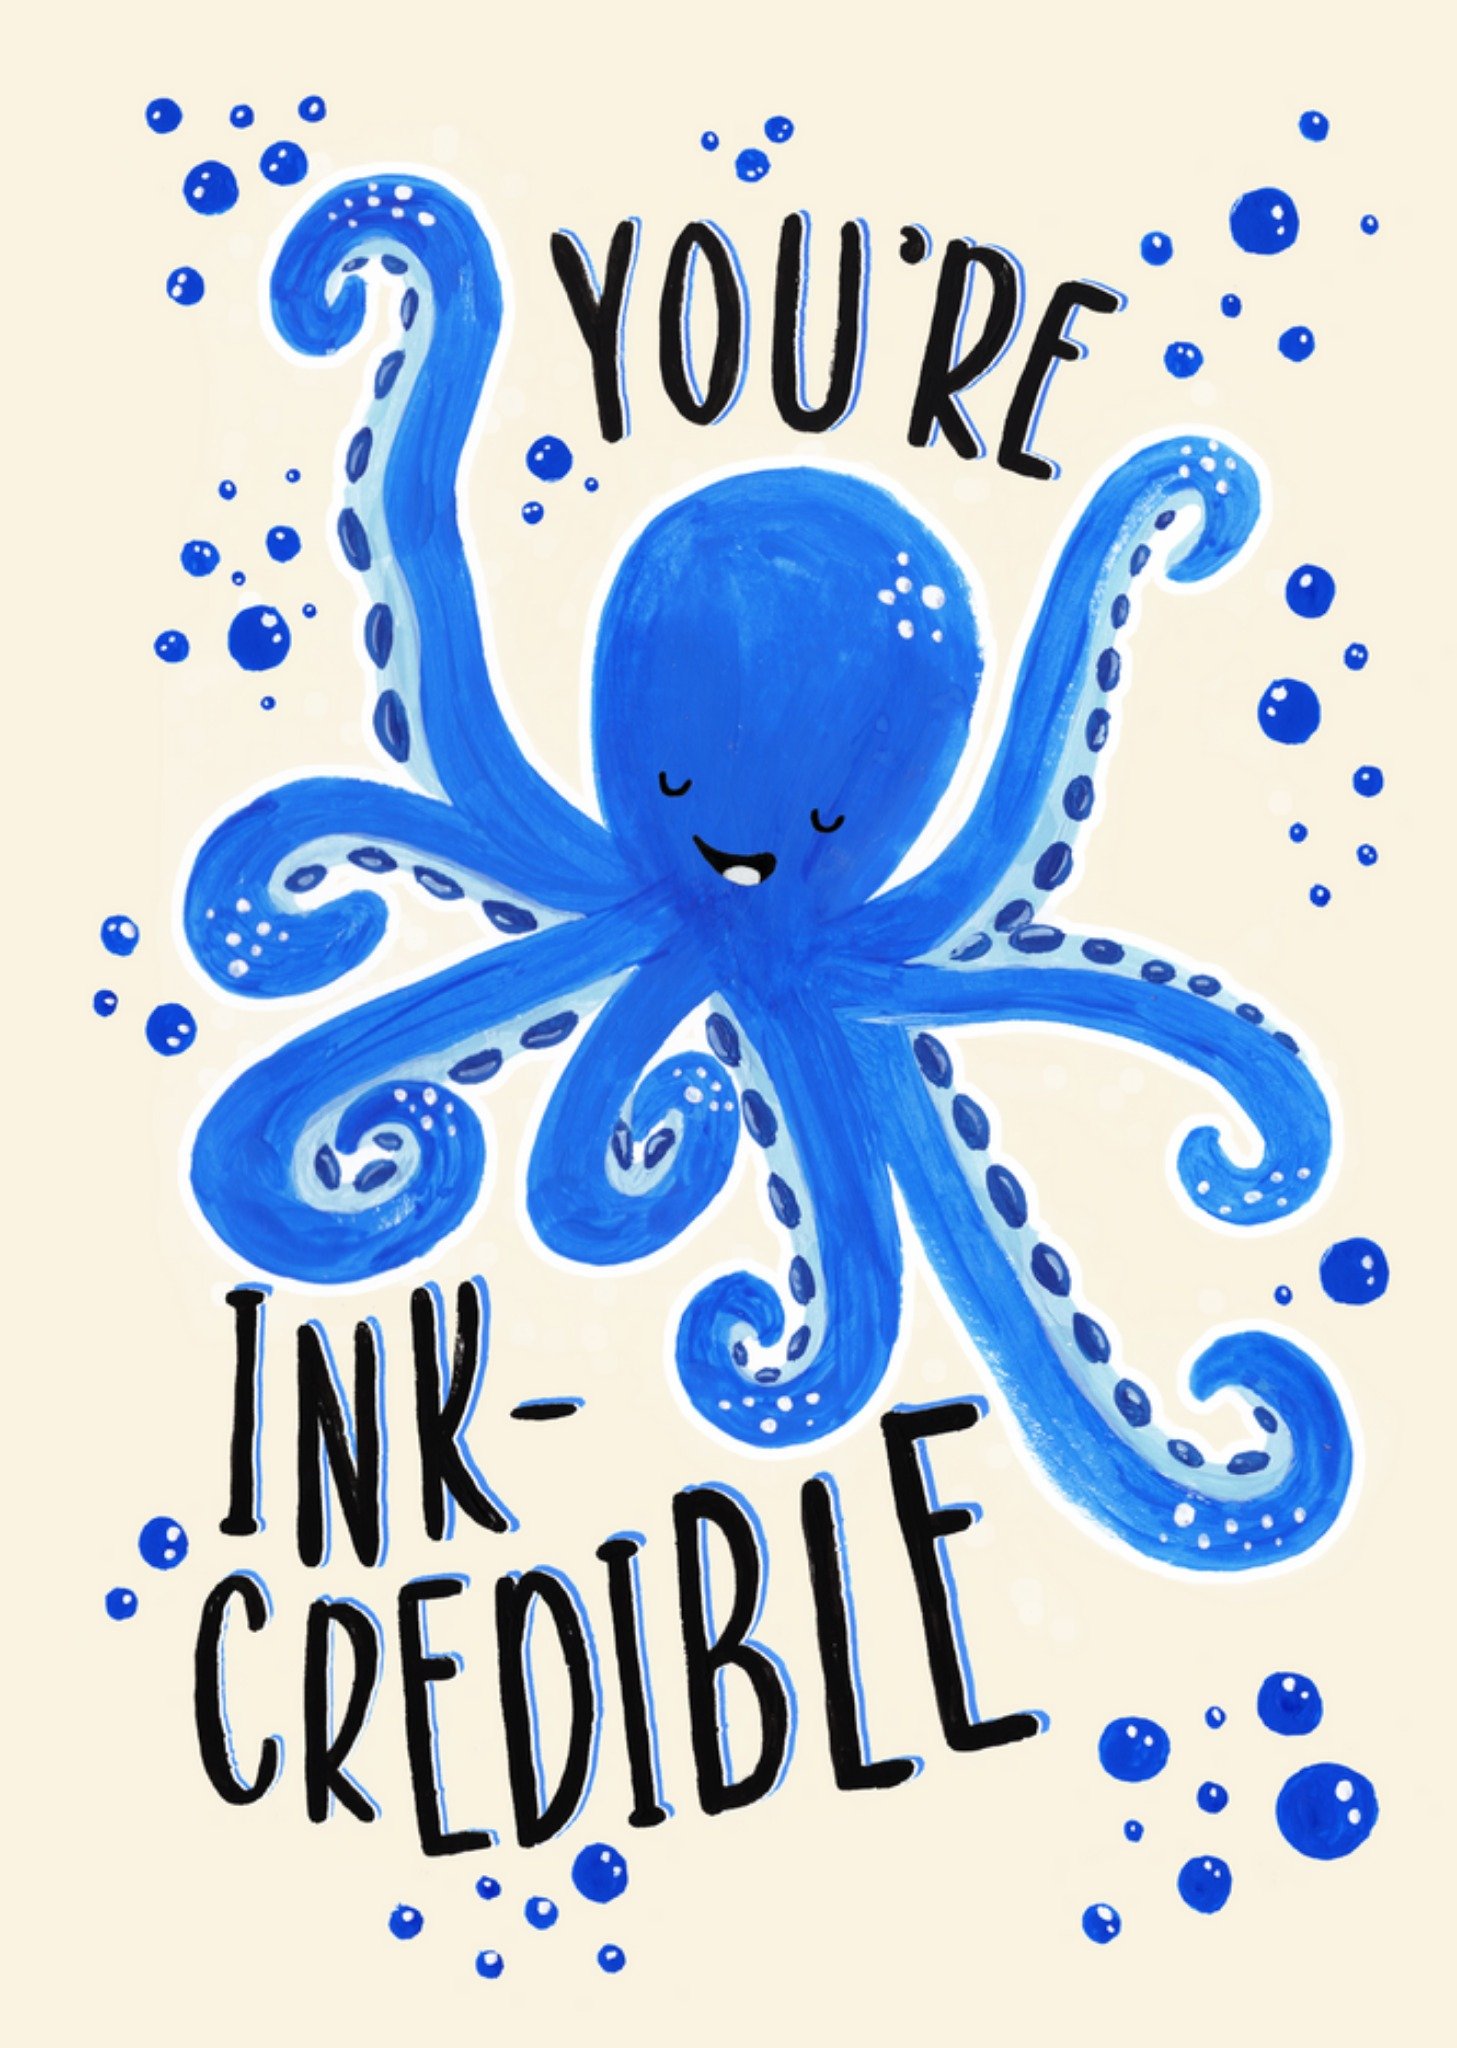 Moonpig Fun Ink-Credible Illustrated Blue Octopus Birthday Greetings Card, Large